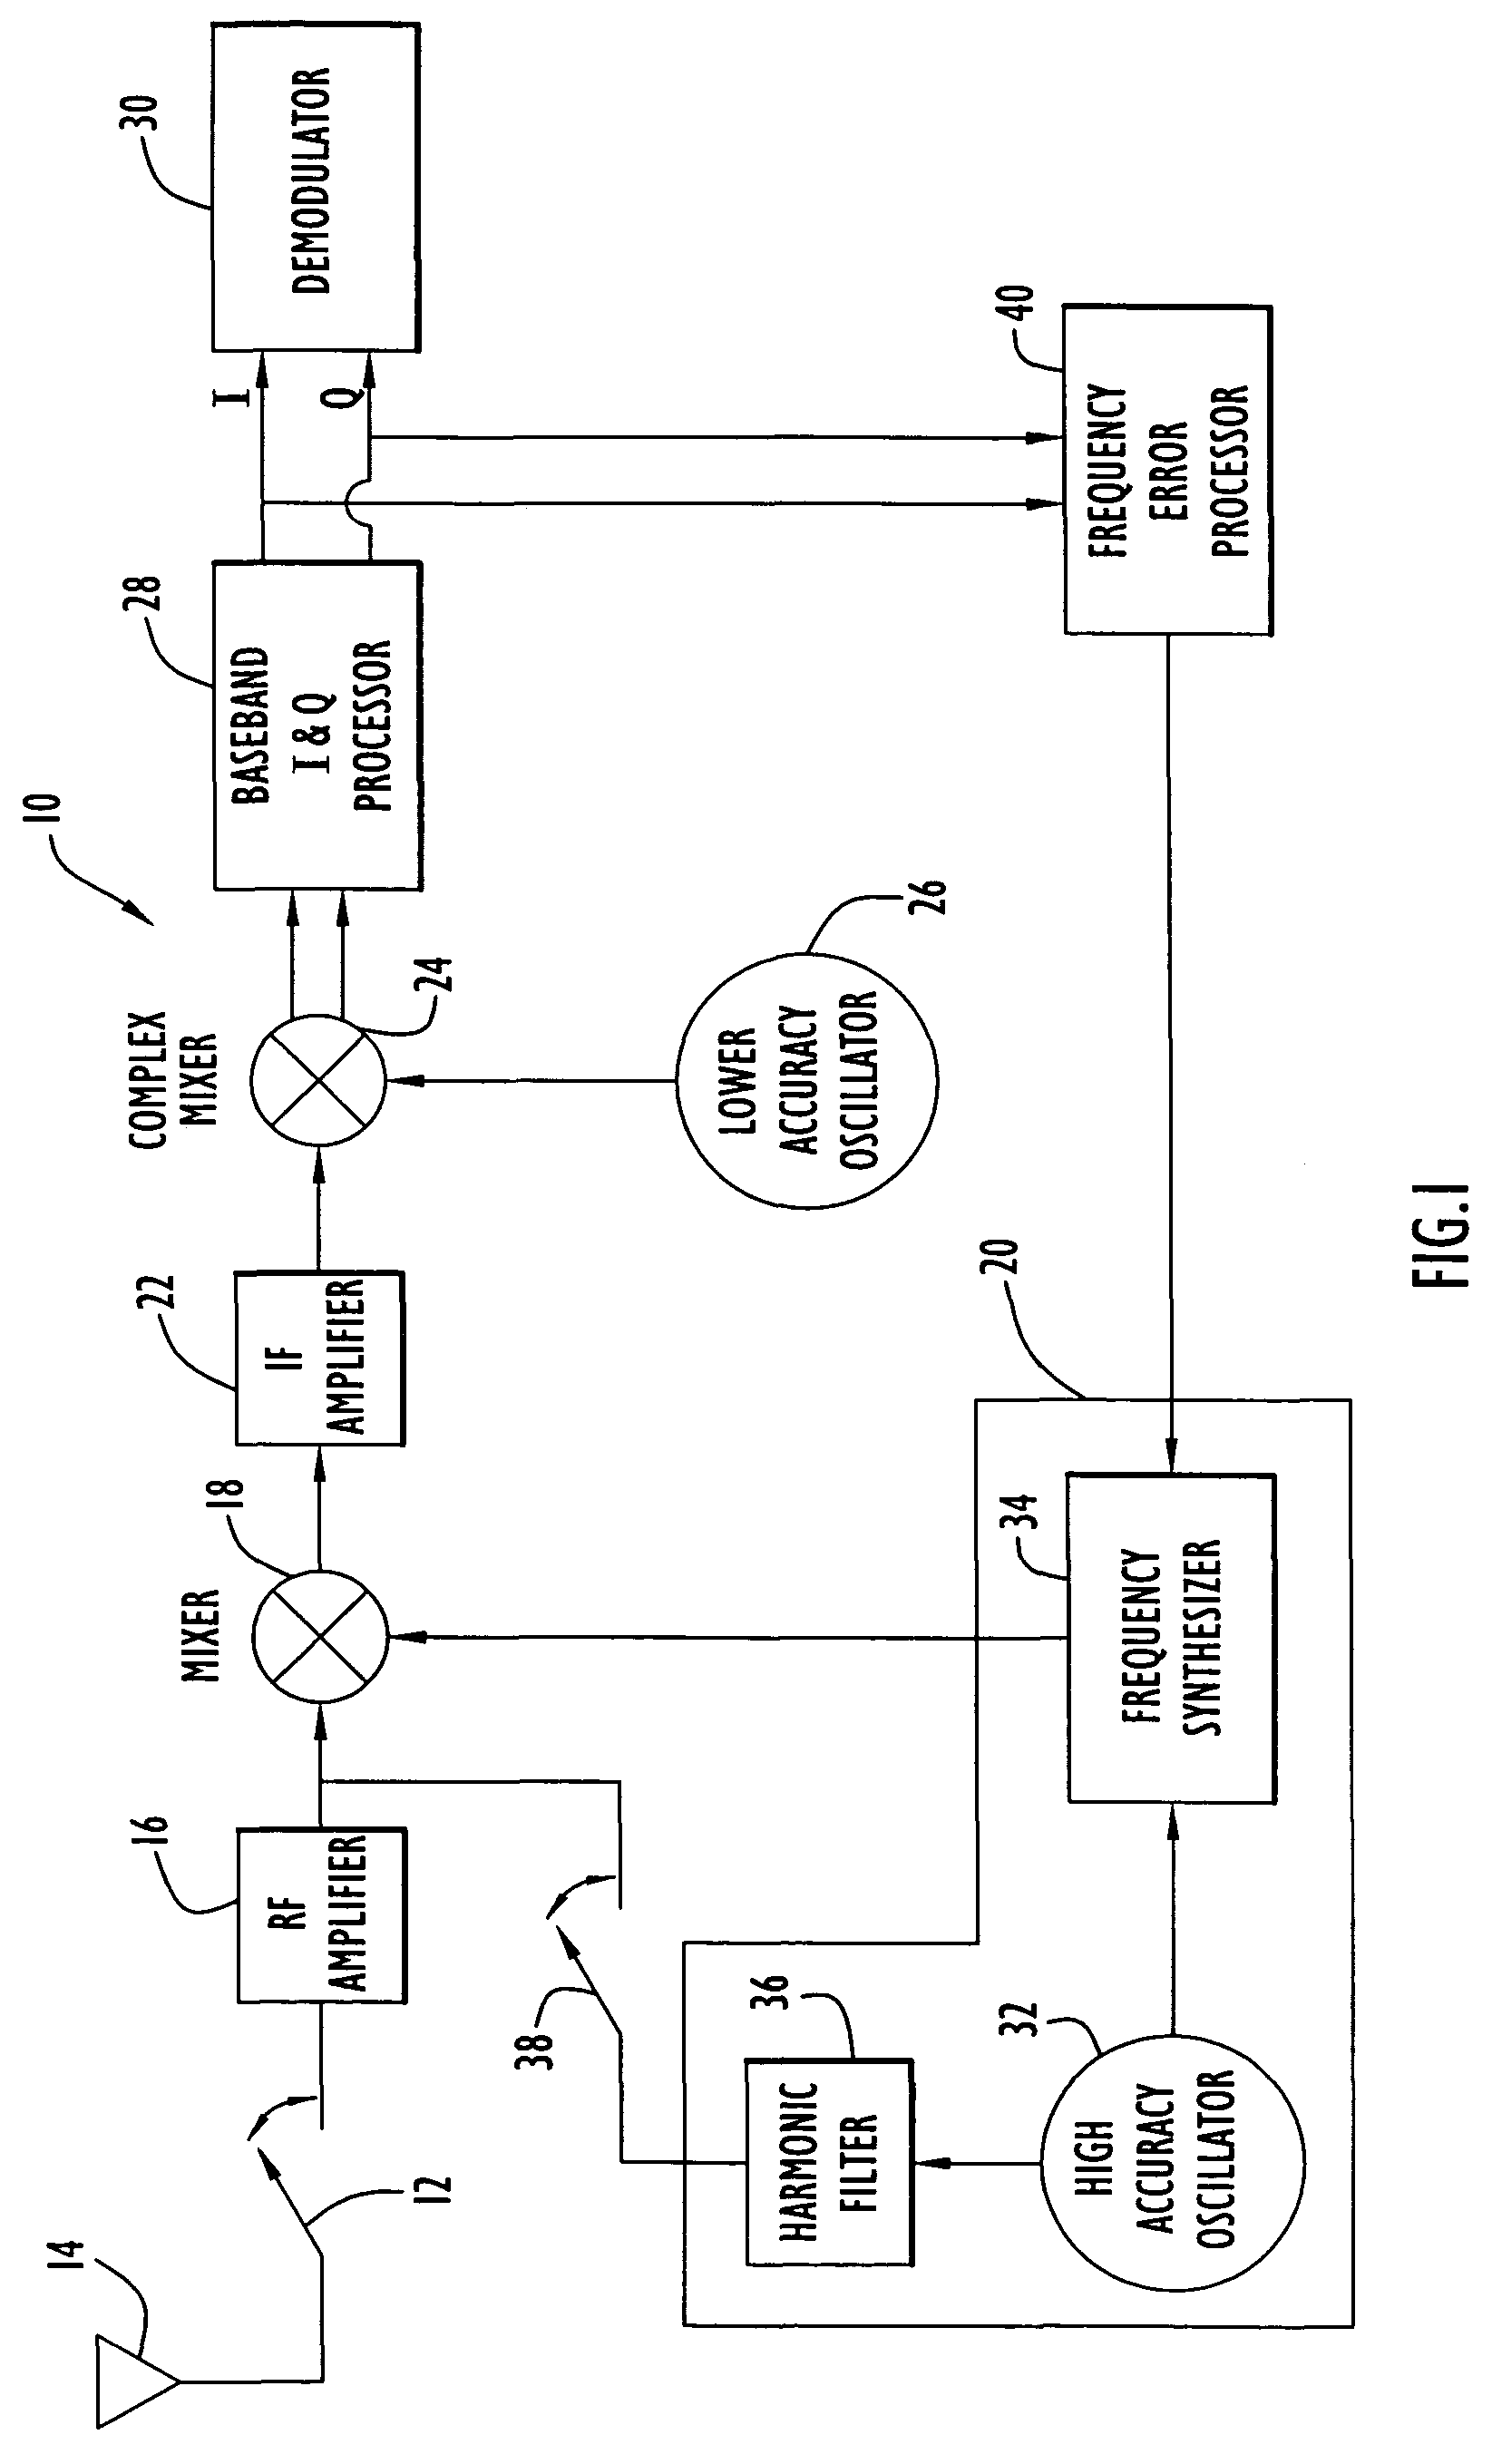 Methods and apparatus for calibrating oscillators in a receiver